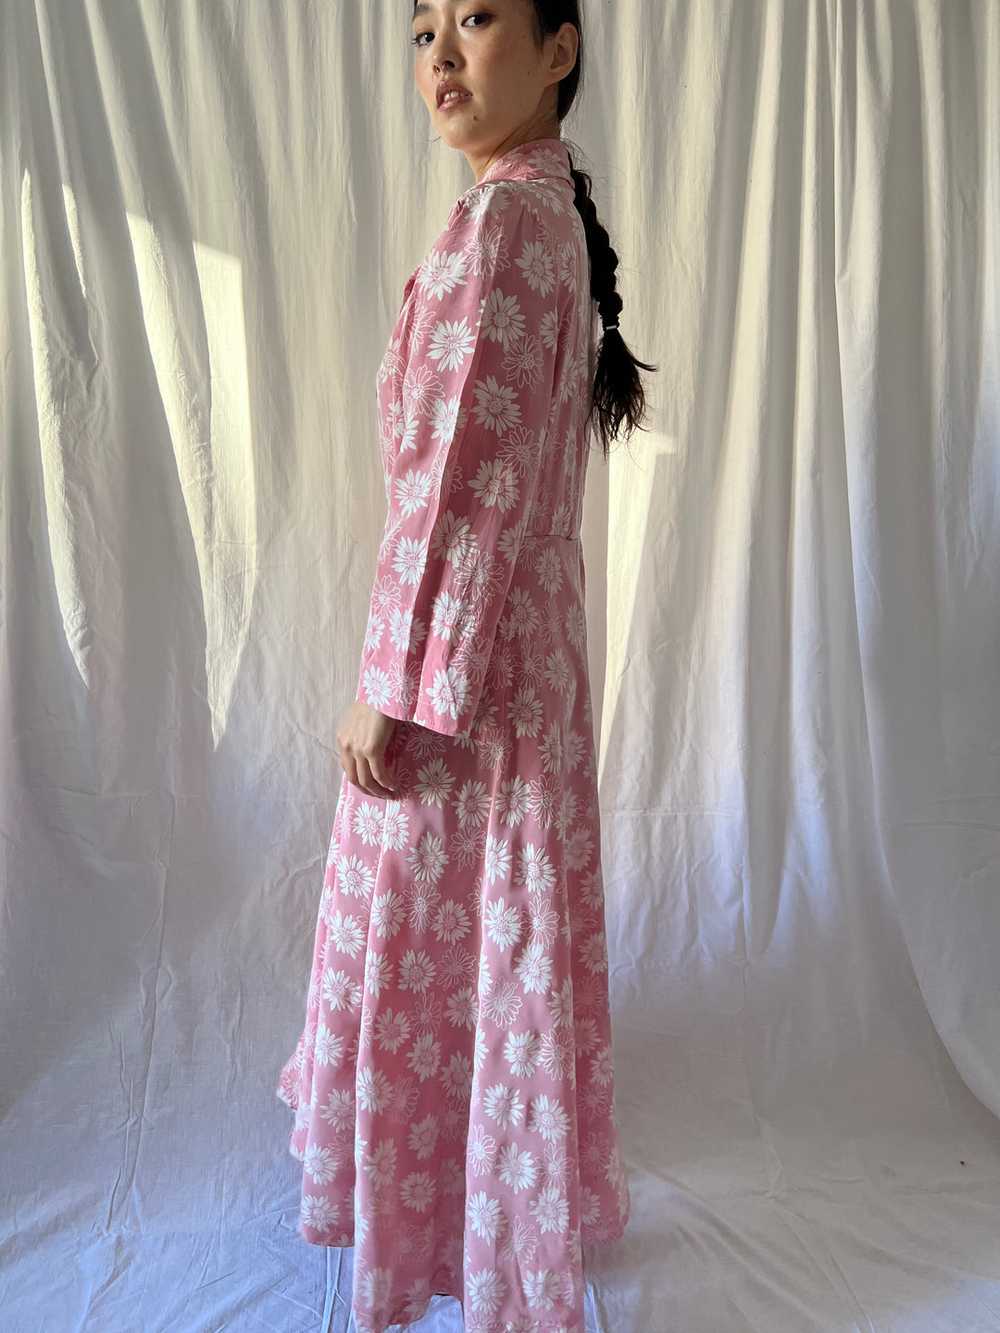 Vintage 1930s pink daisies gown robe - image 6